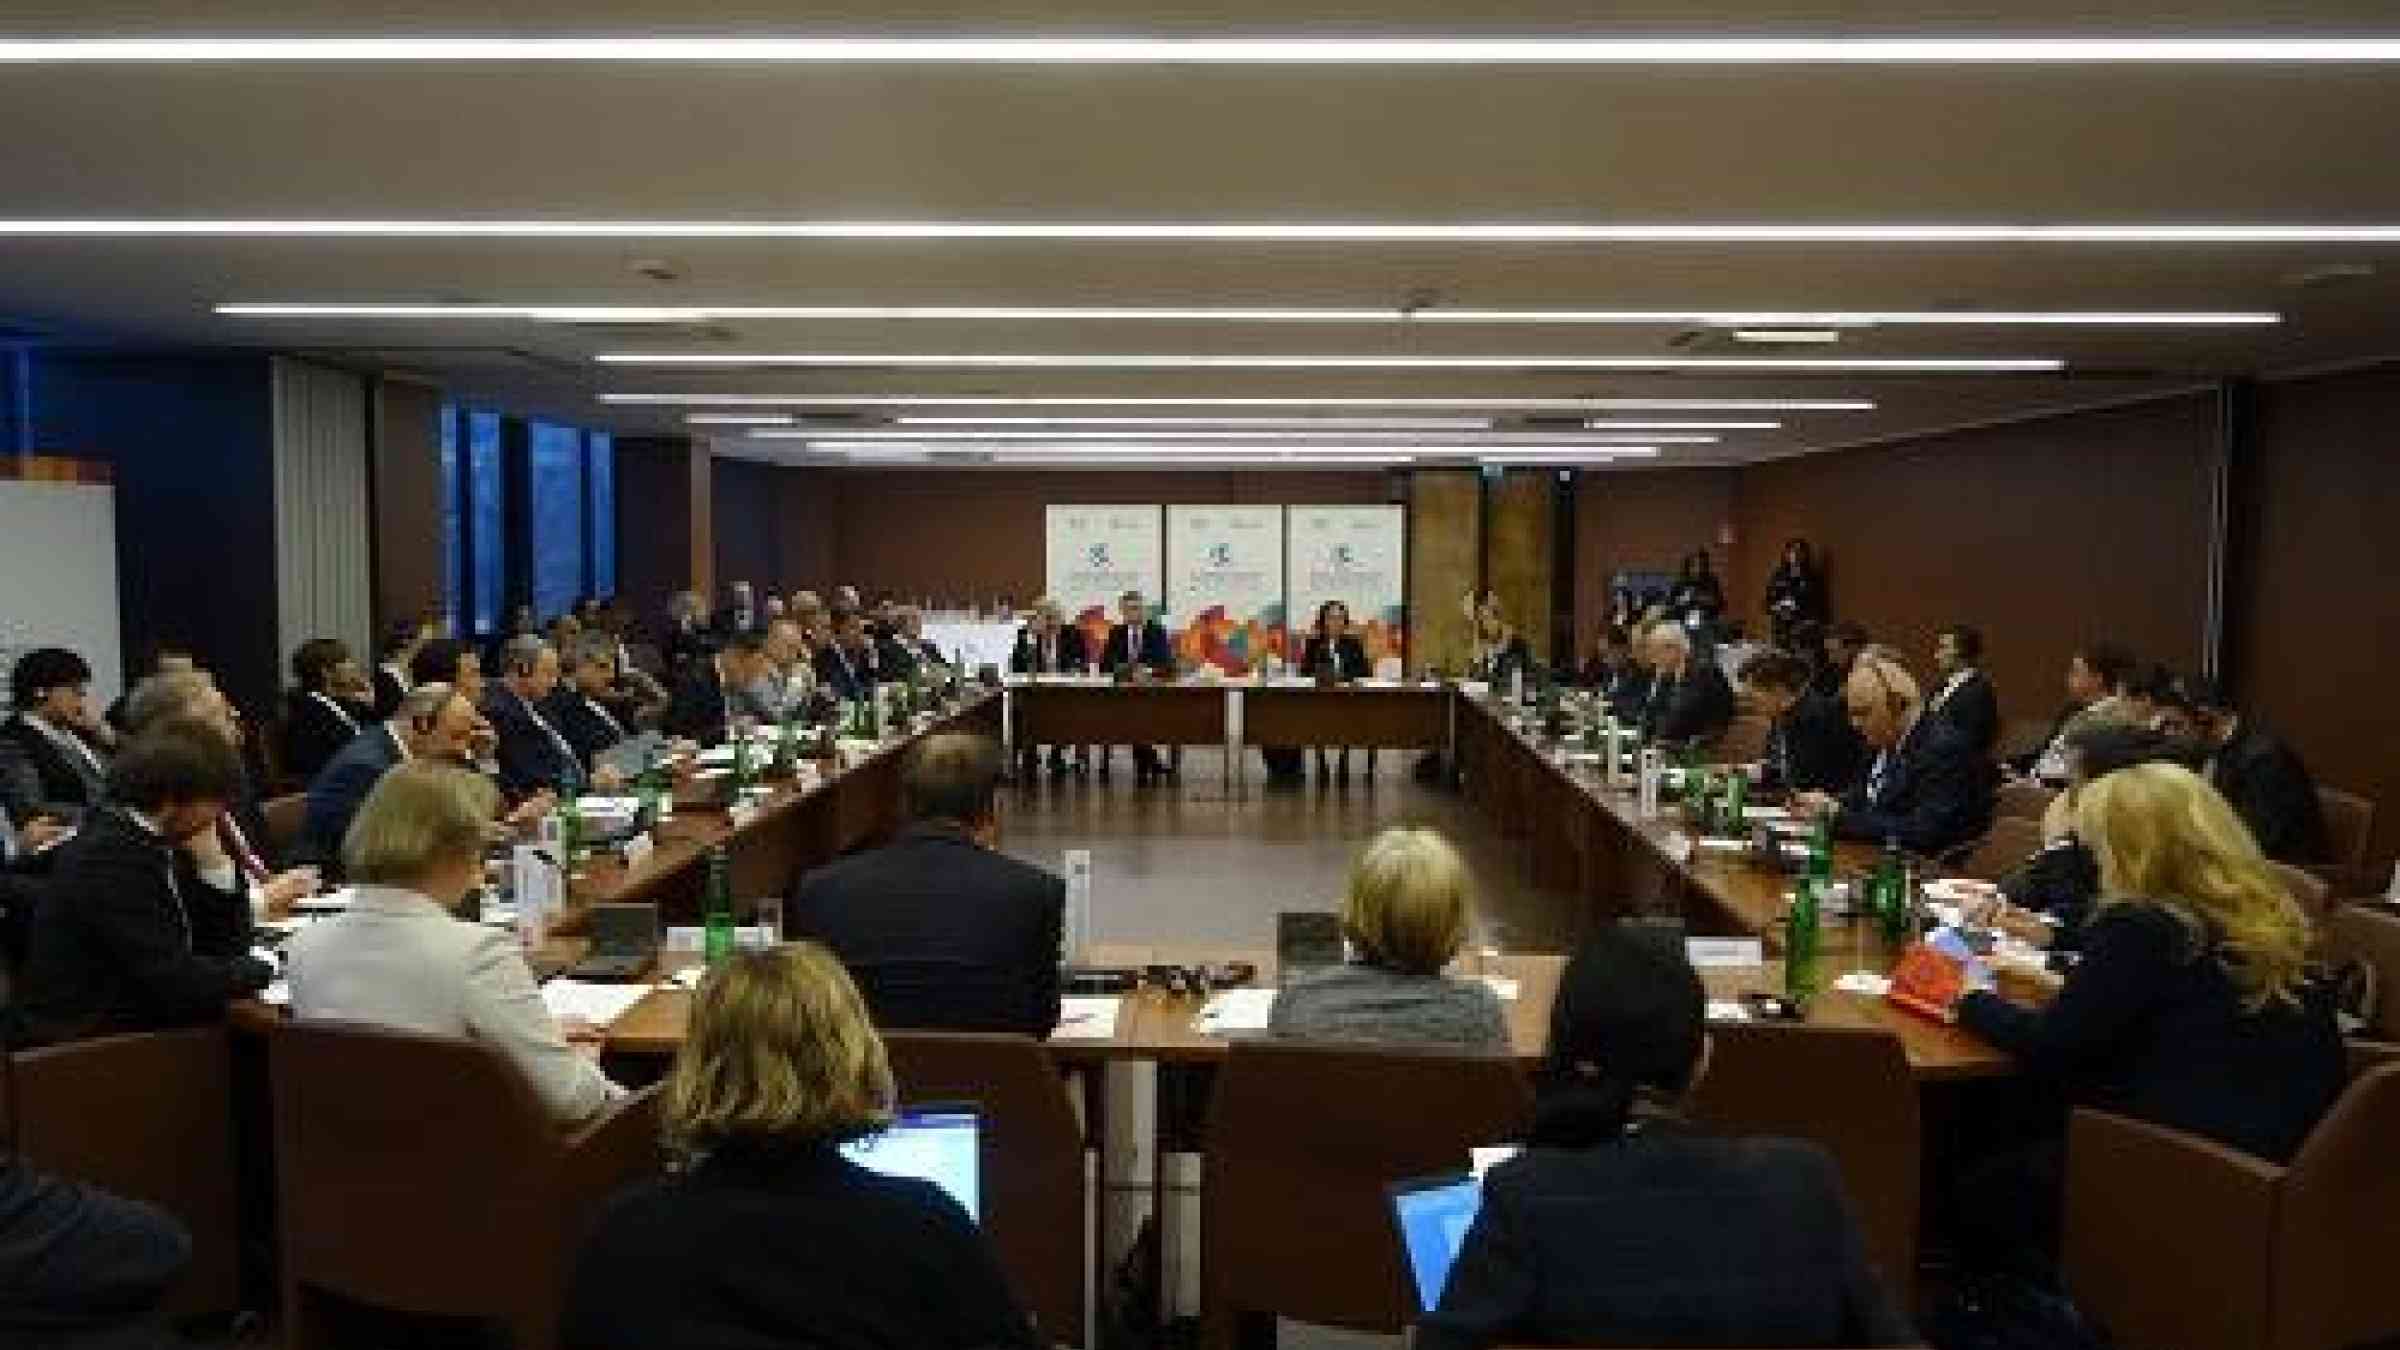 A High Level Roundtable convened today at the European Forum for Disaster Risk Reduction